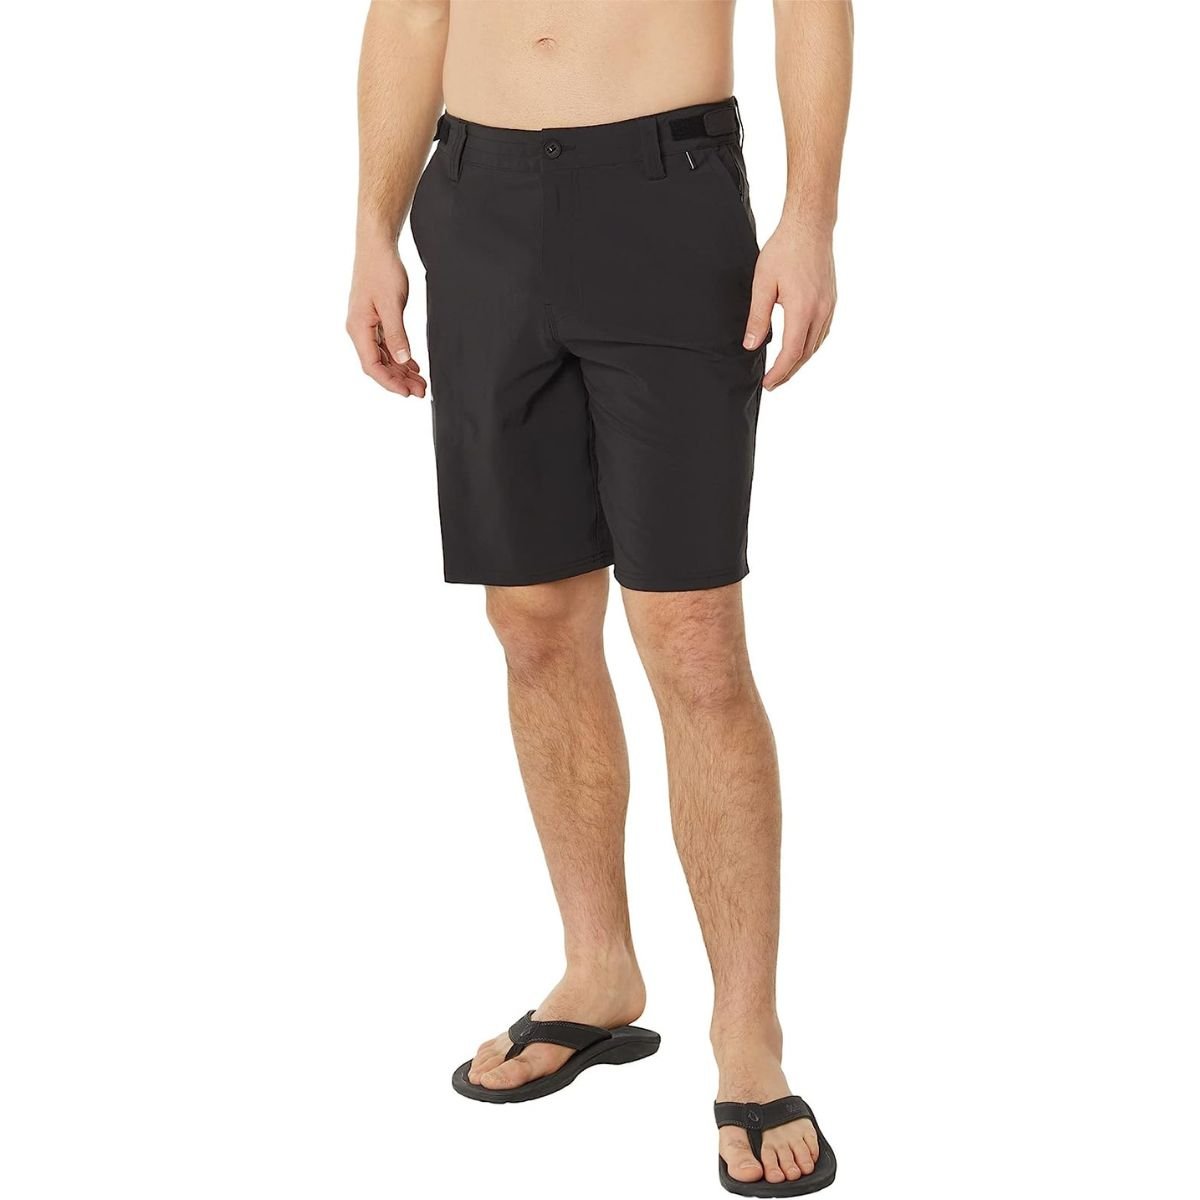 O'Neill TRVLR Expedition Hybrid Shorts in Black - BoardCo